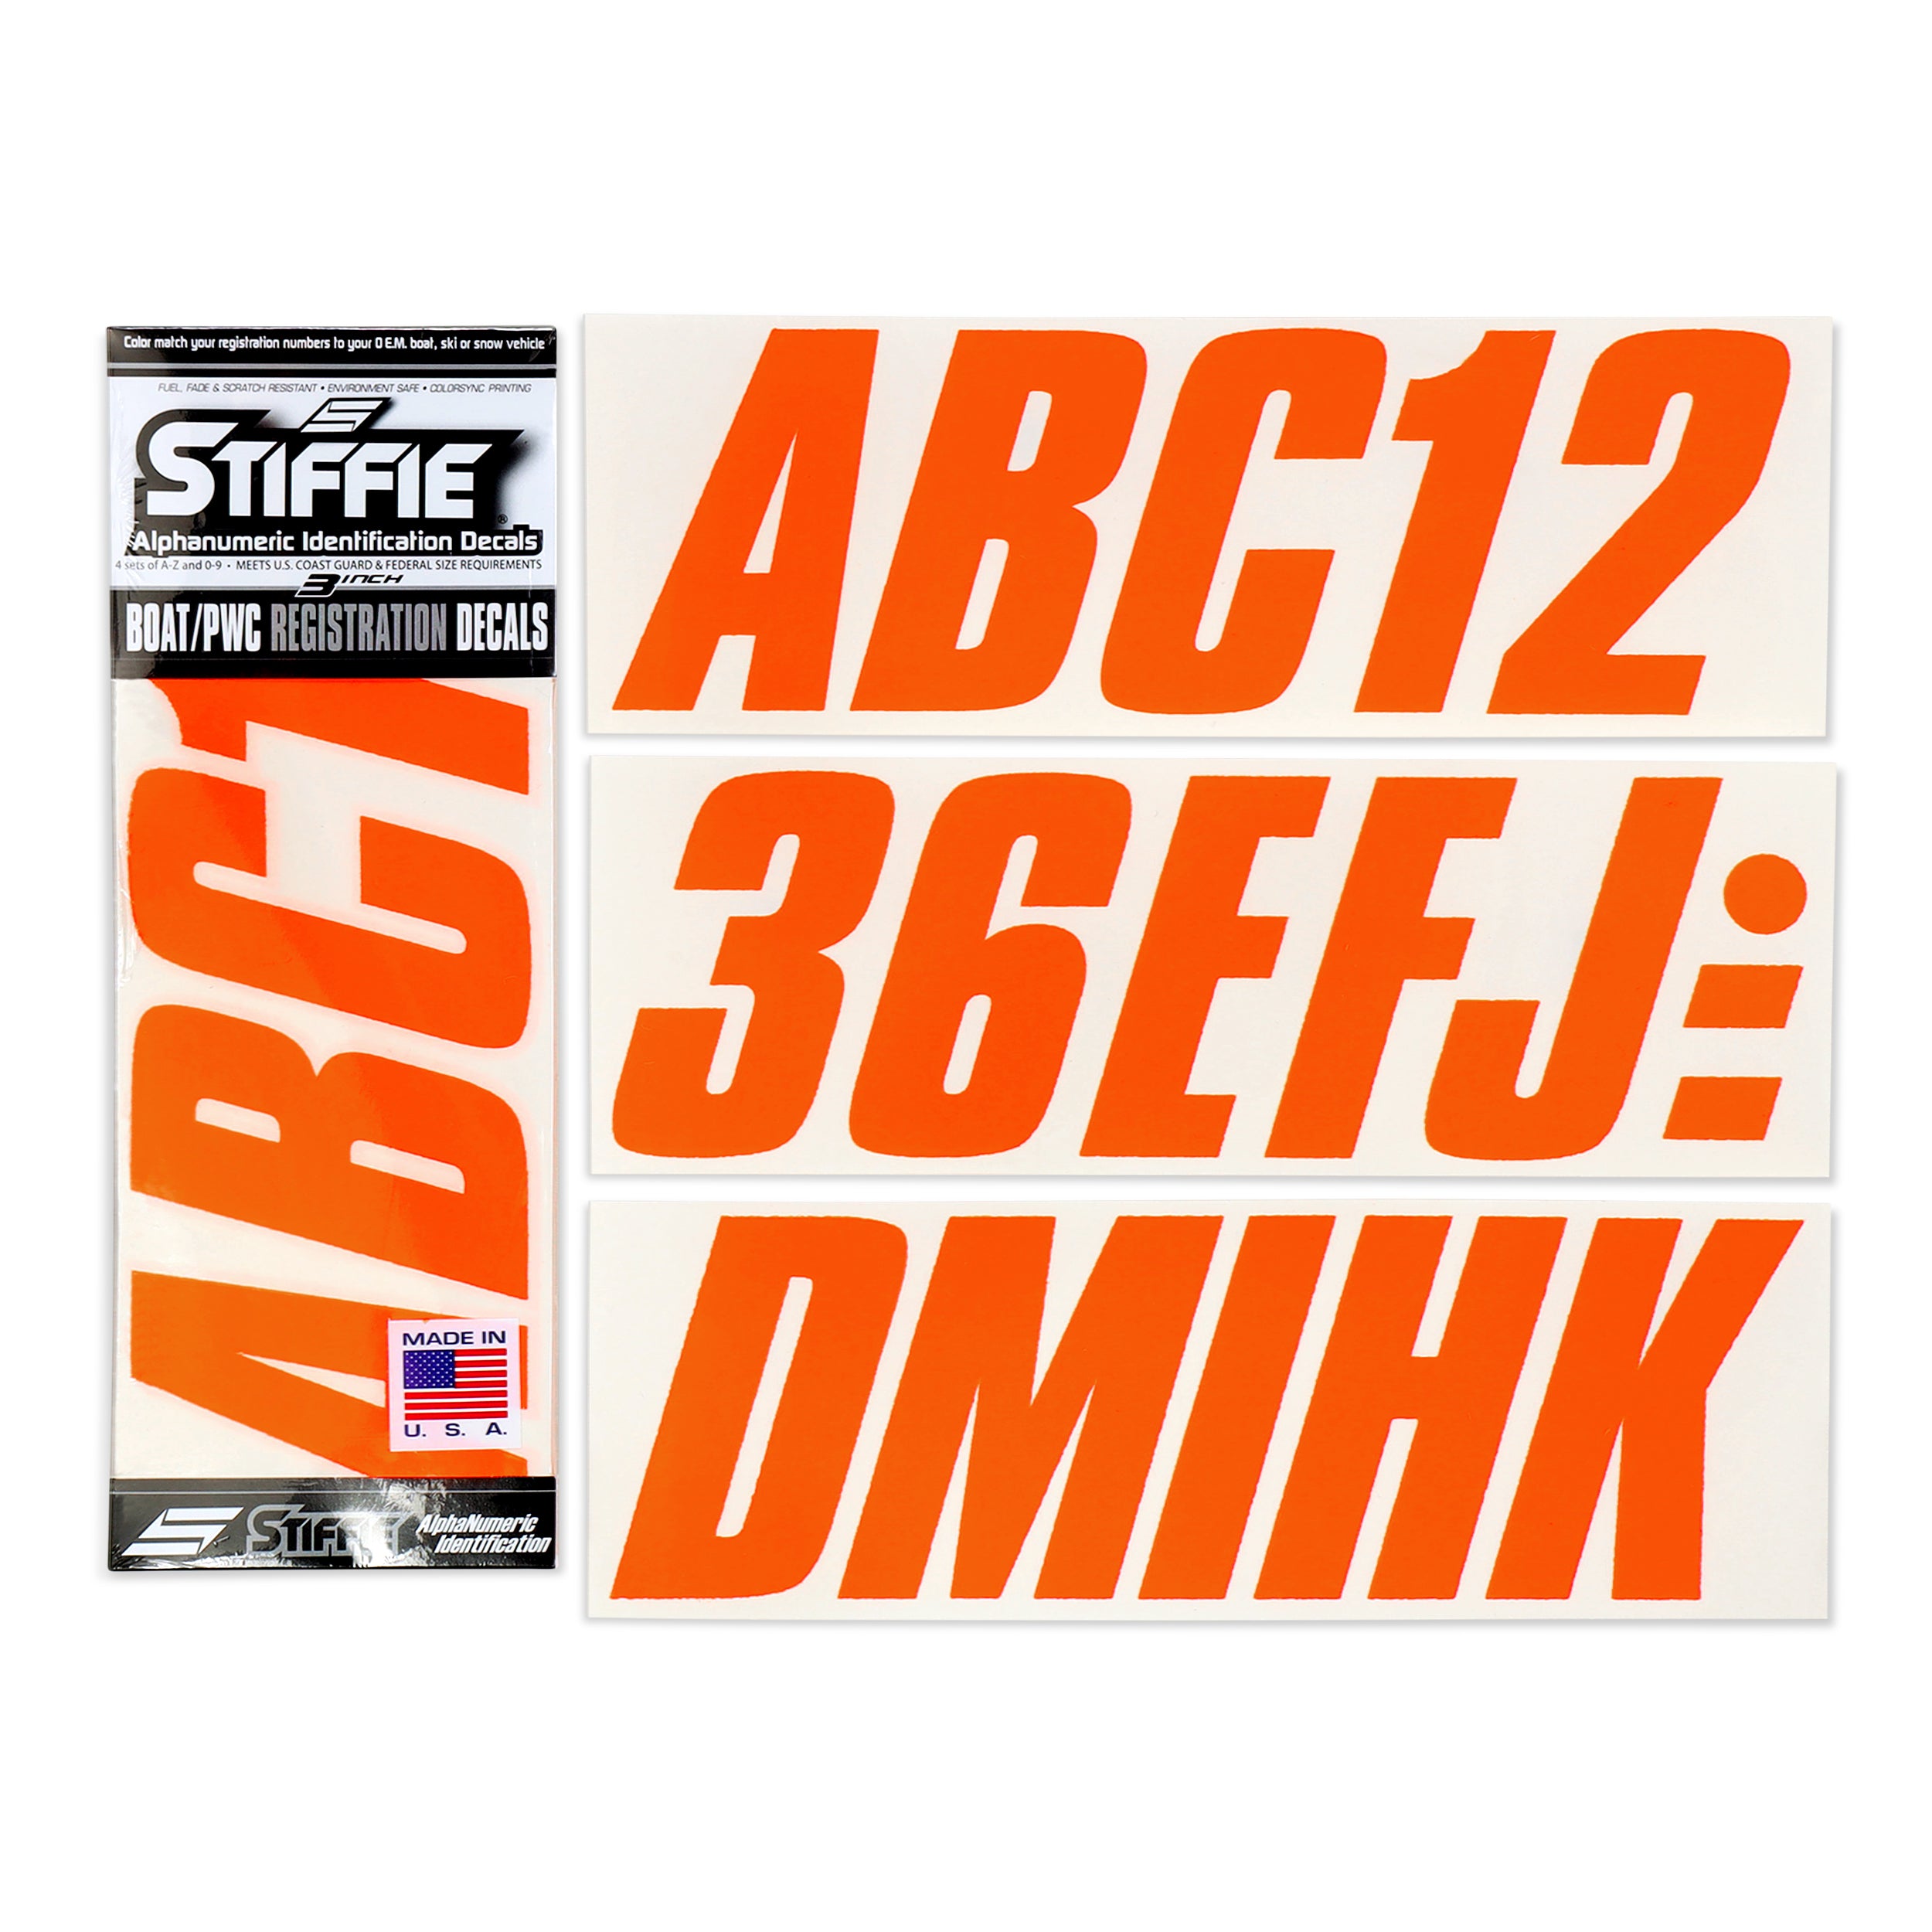 STIFFIE Shift Electric Orange 3" ID Kit Alpha-Numeric Registration Identification Numbers Stickers Decals for Boats & Personal Watercraft